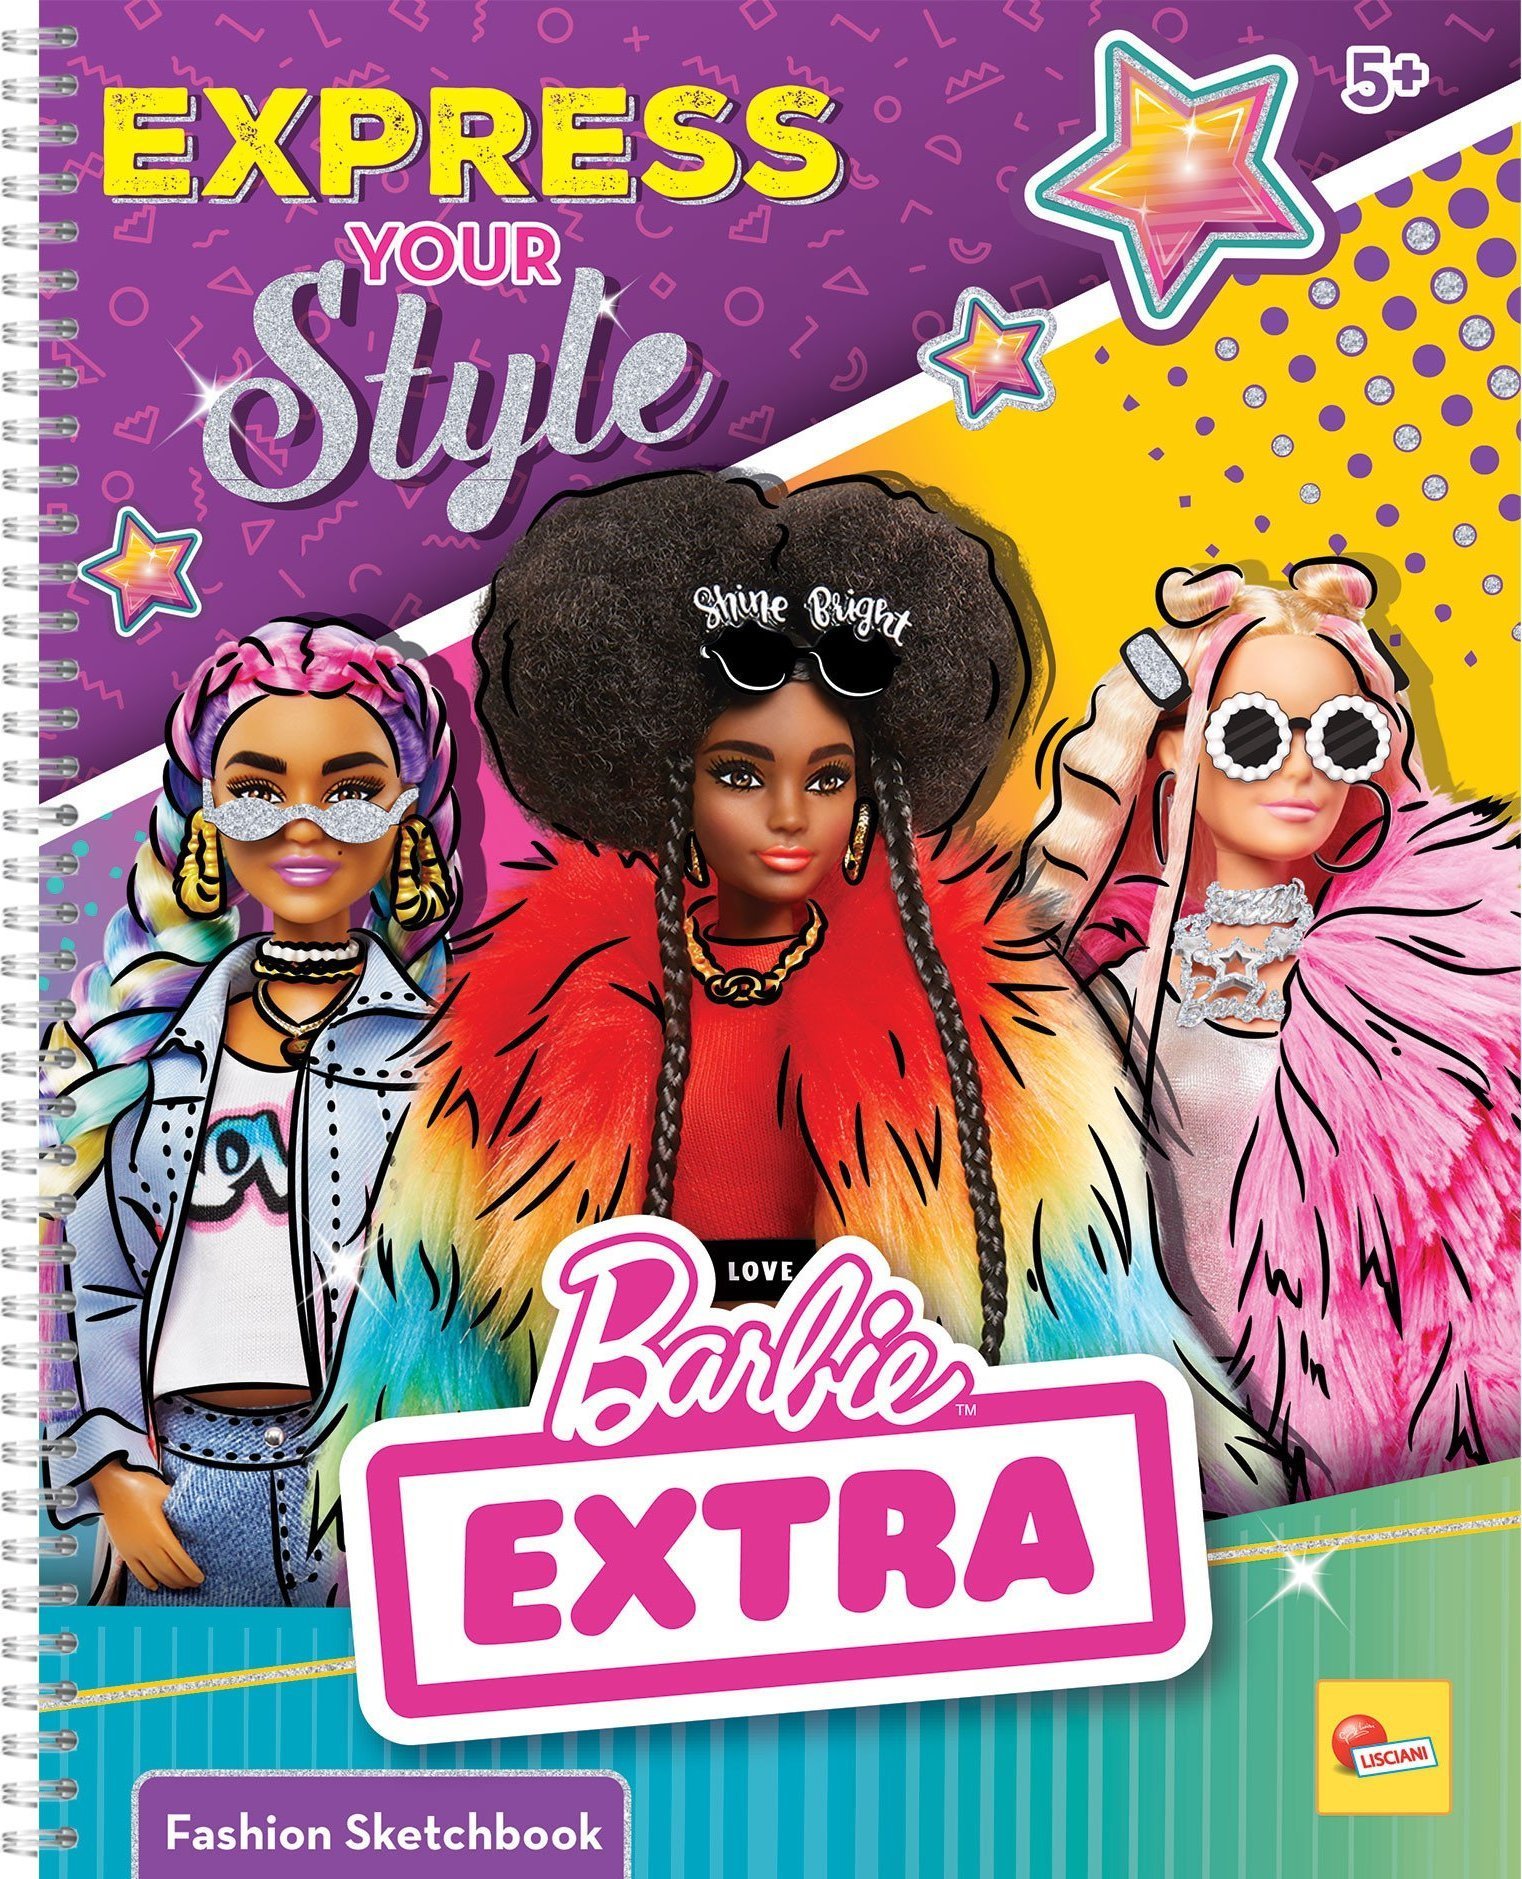 LISCIANI BARBIE SKETCH BOOK EXPRESS YOUR STYLE.